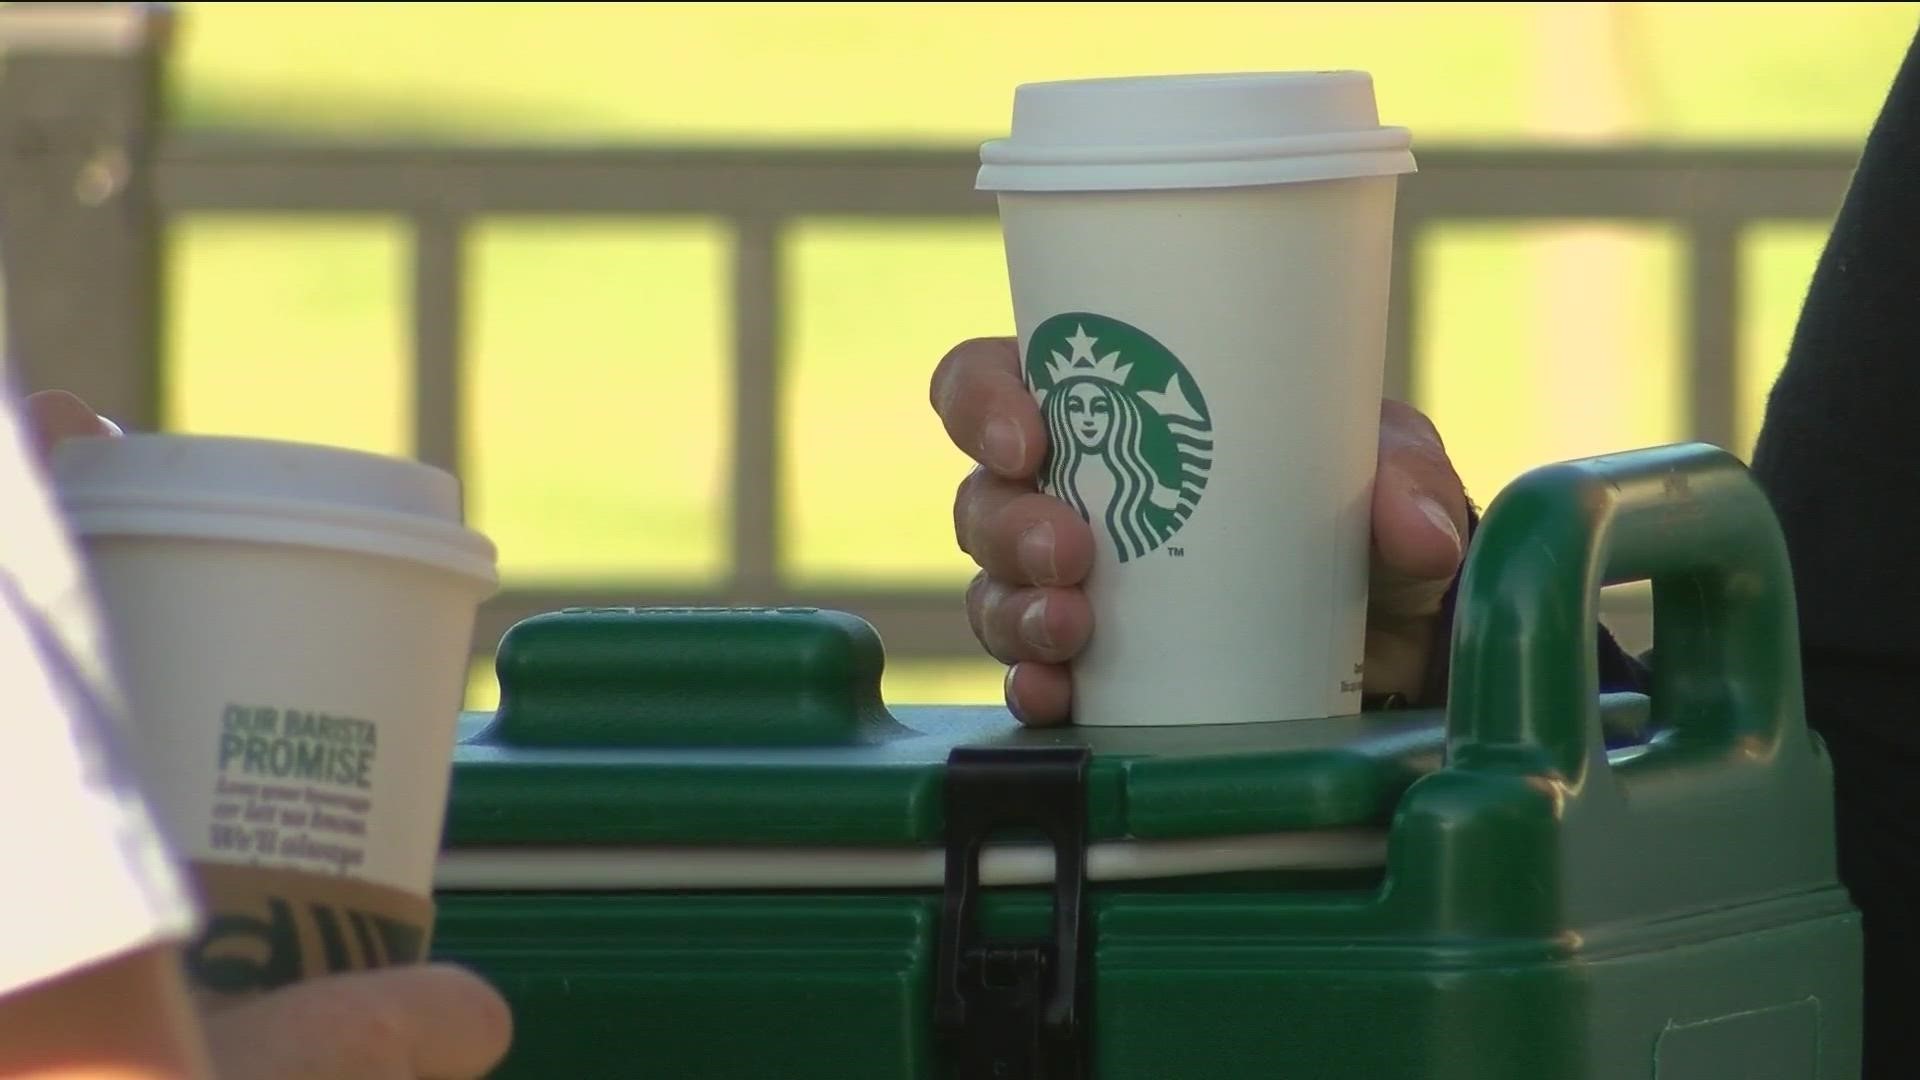 More than 250 Starbucks locations across the country have unionized in the last few years. This would be the first location in northwest Ohio to do so.